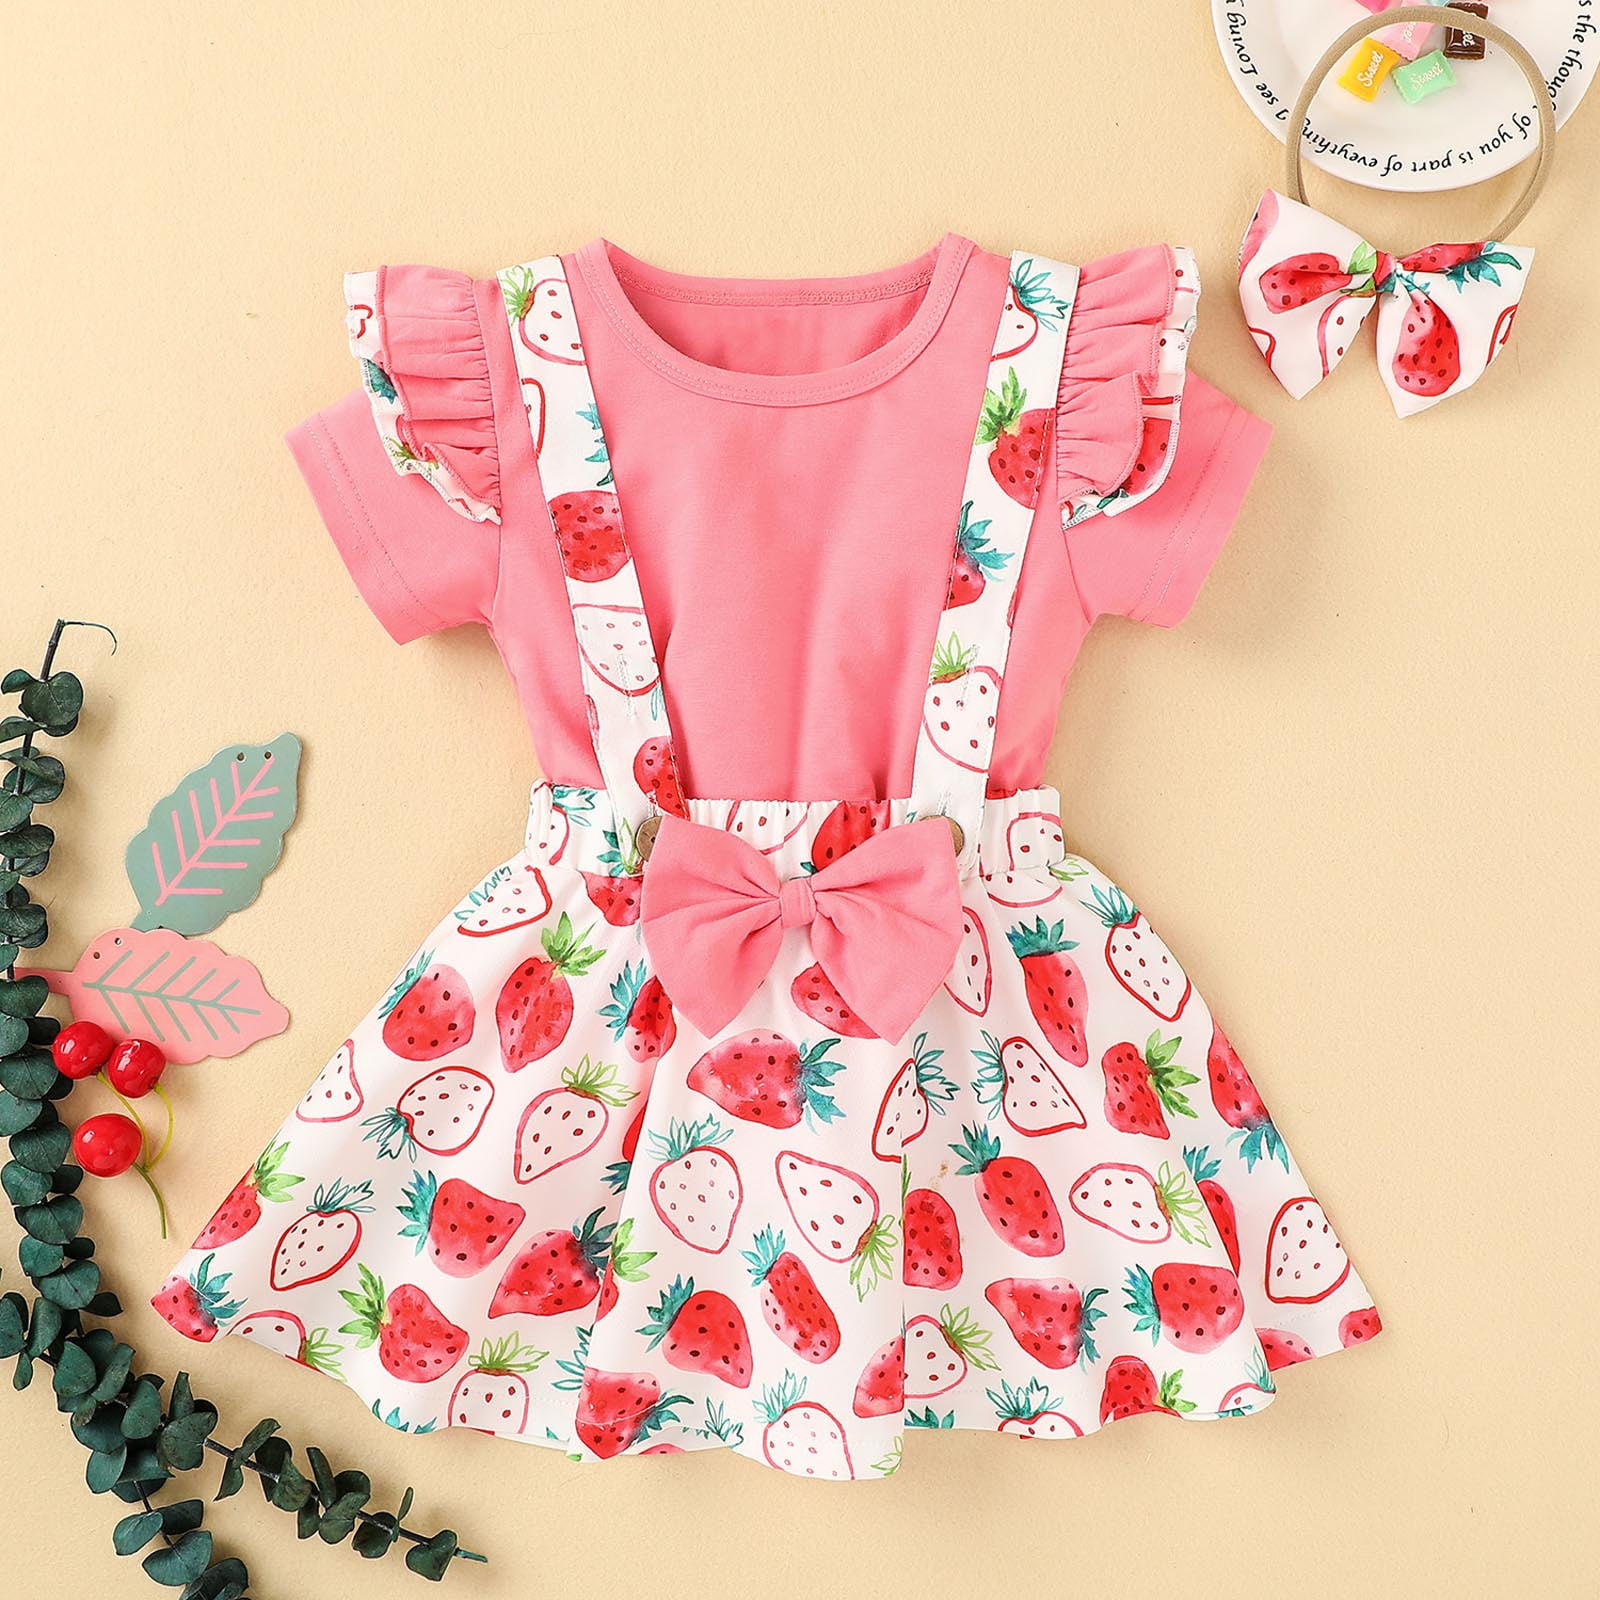 Iuhan 3pcs Baby Girls Clothes Set Playwear for Toddler Baby Girls Letter Print Vest Tops+Floral Denim Shorts+Headband Outfits 